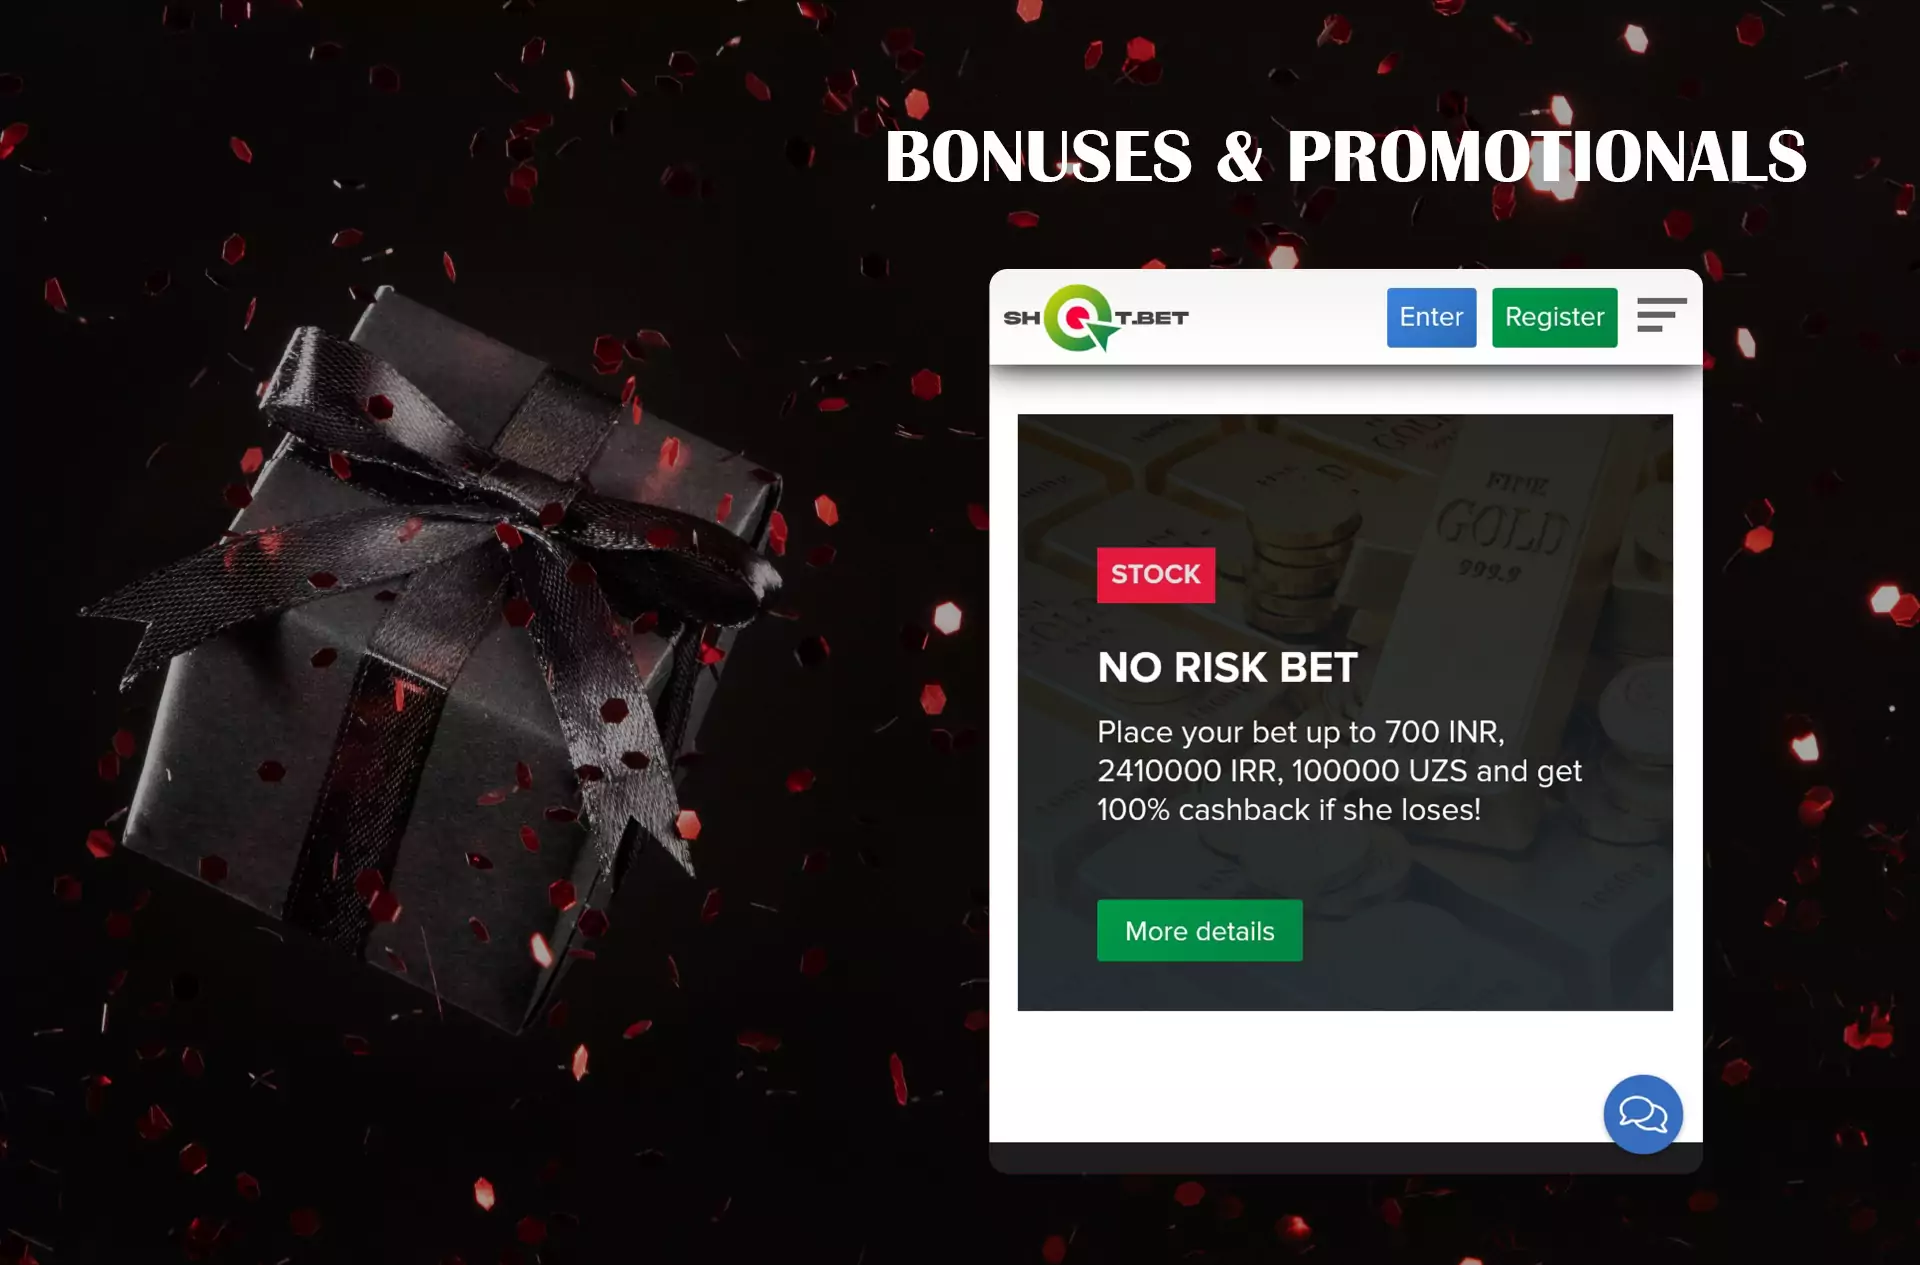 New users of Shot bet can take part in some promotions in order to receive a welcome bonus.